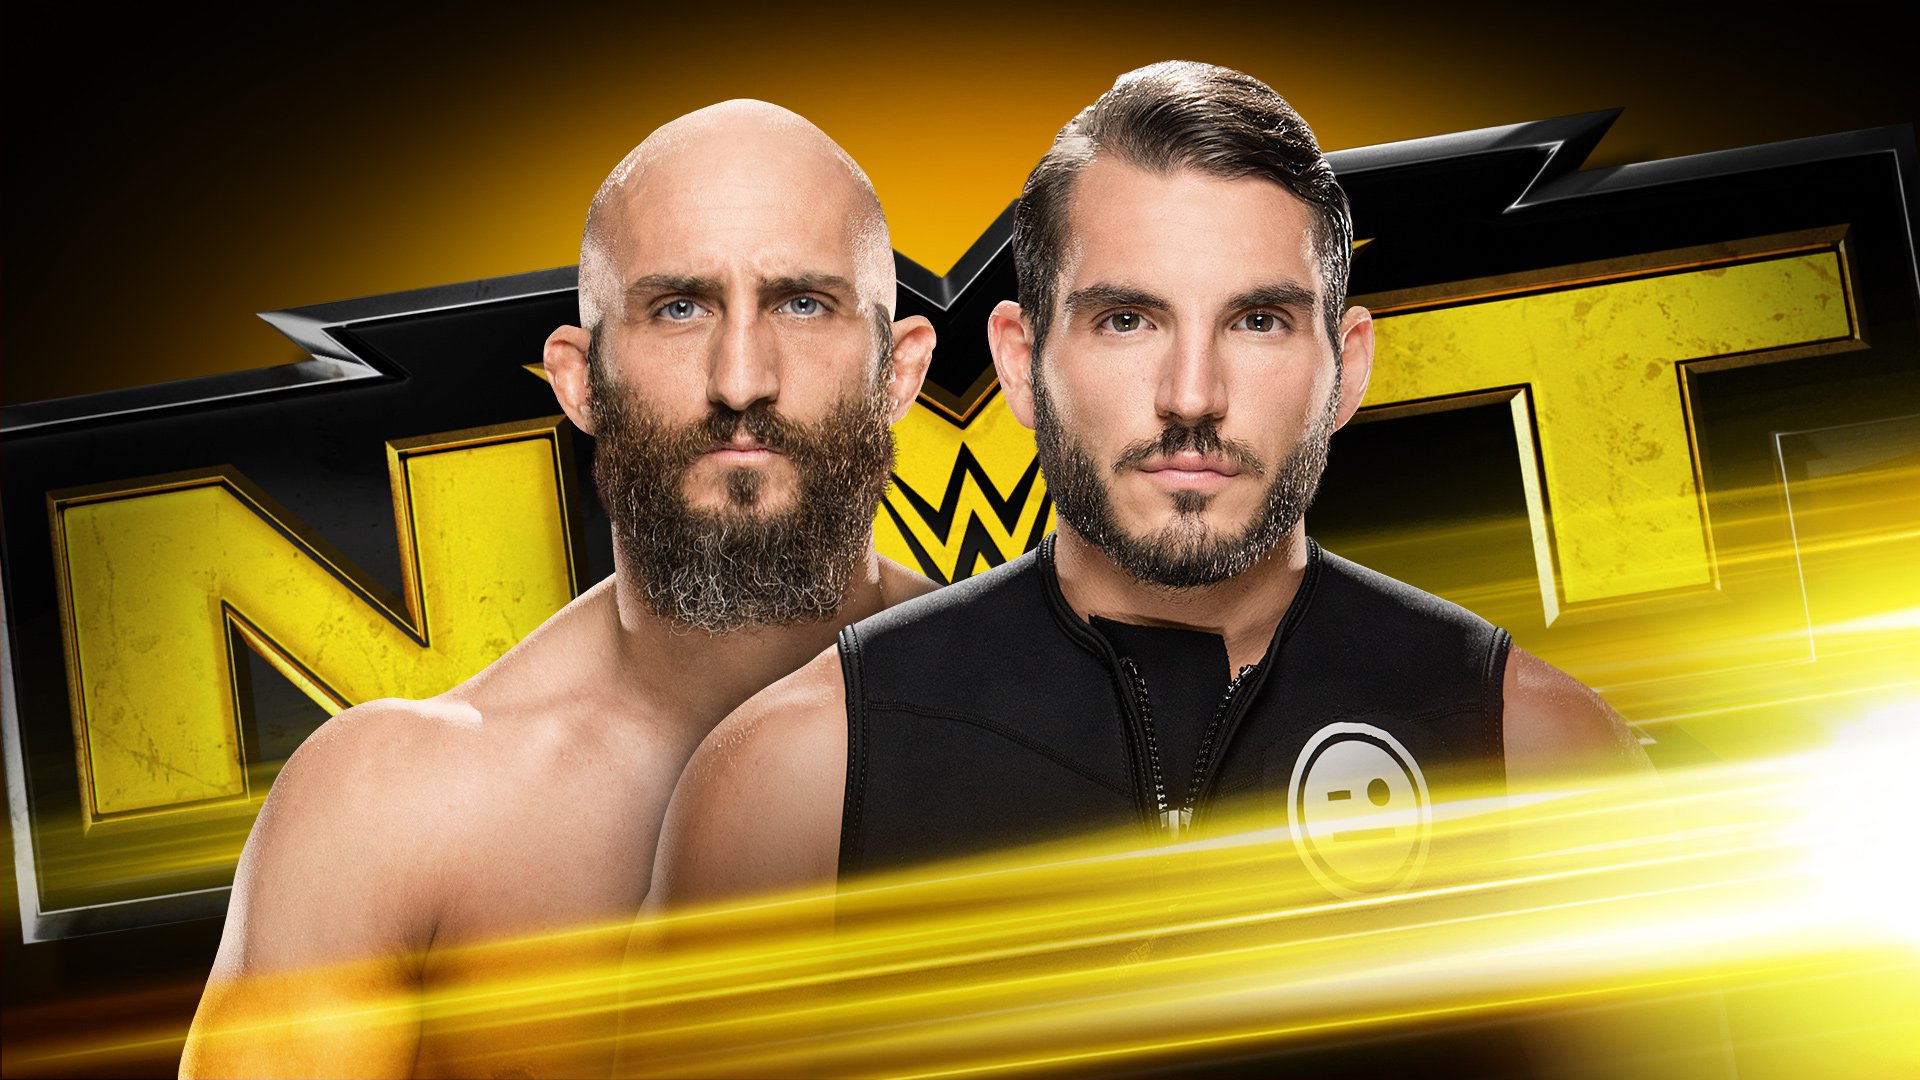 What’s next for new NXT Tag Team Champions #DIY? | WWE